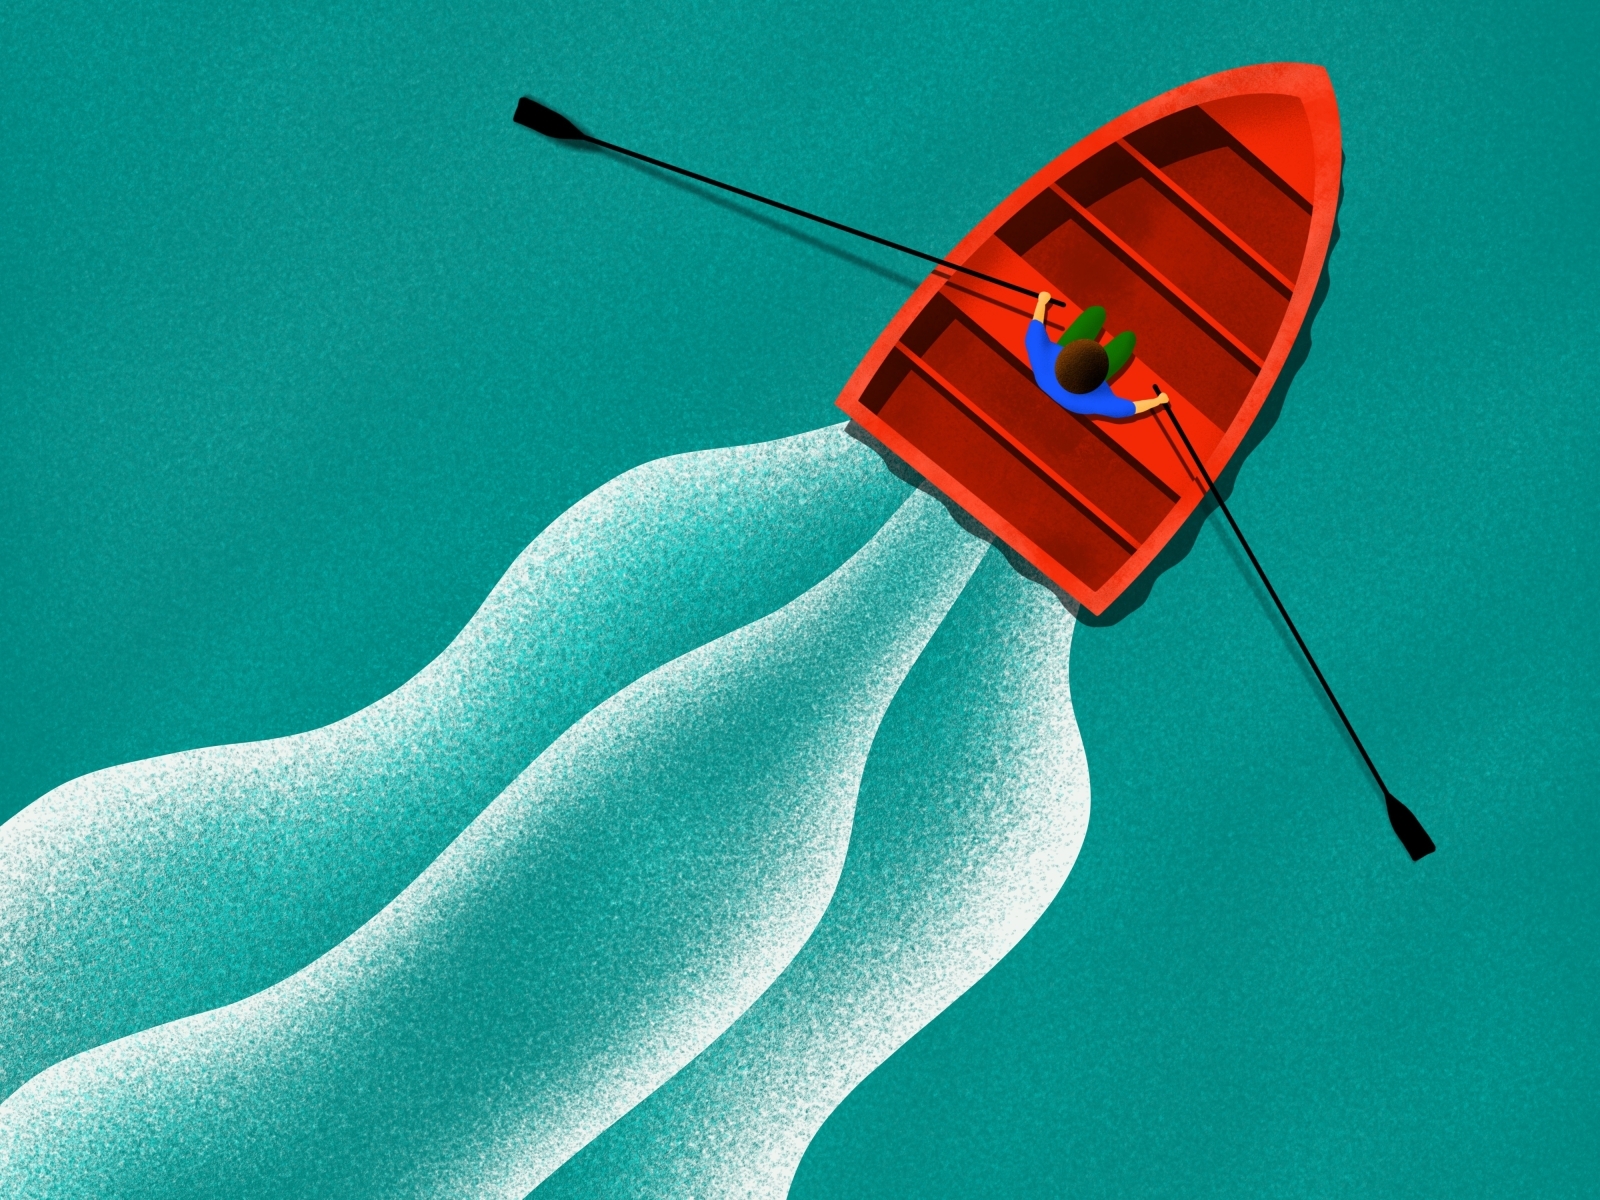 The Boat by Hossein Shahyari on Dribbble